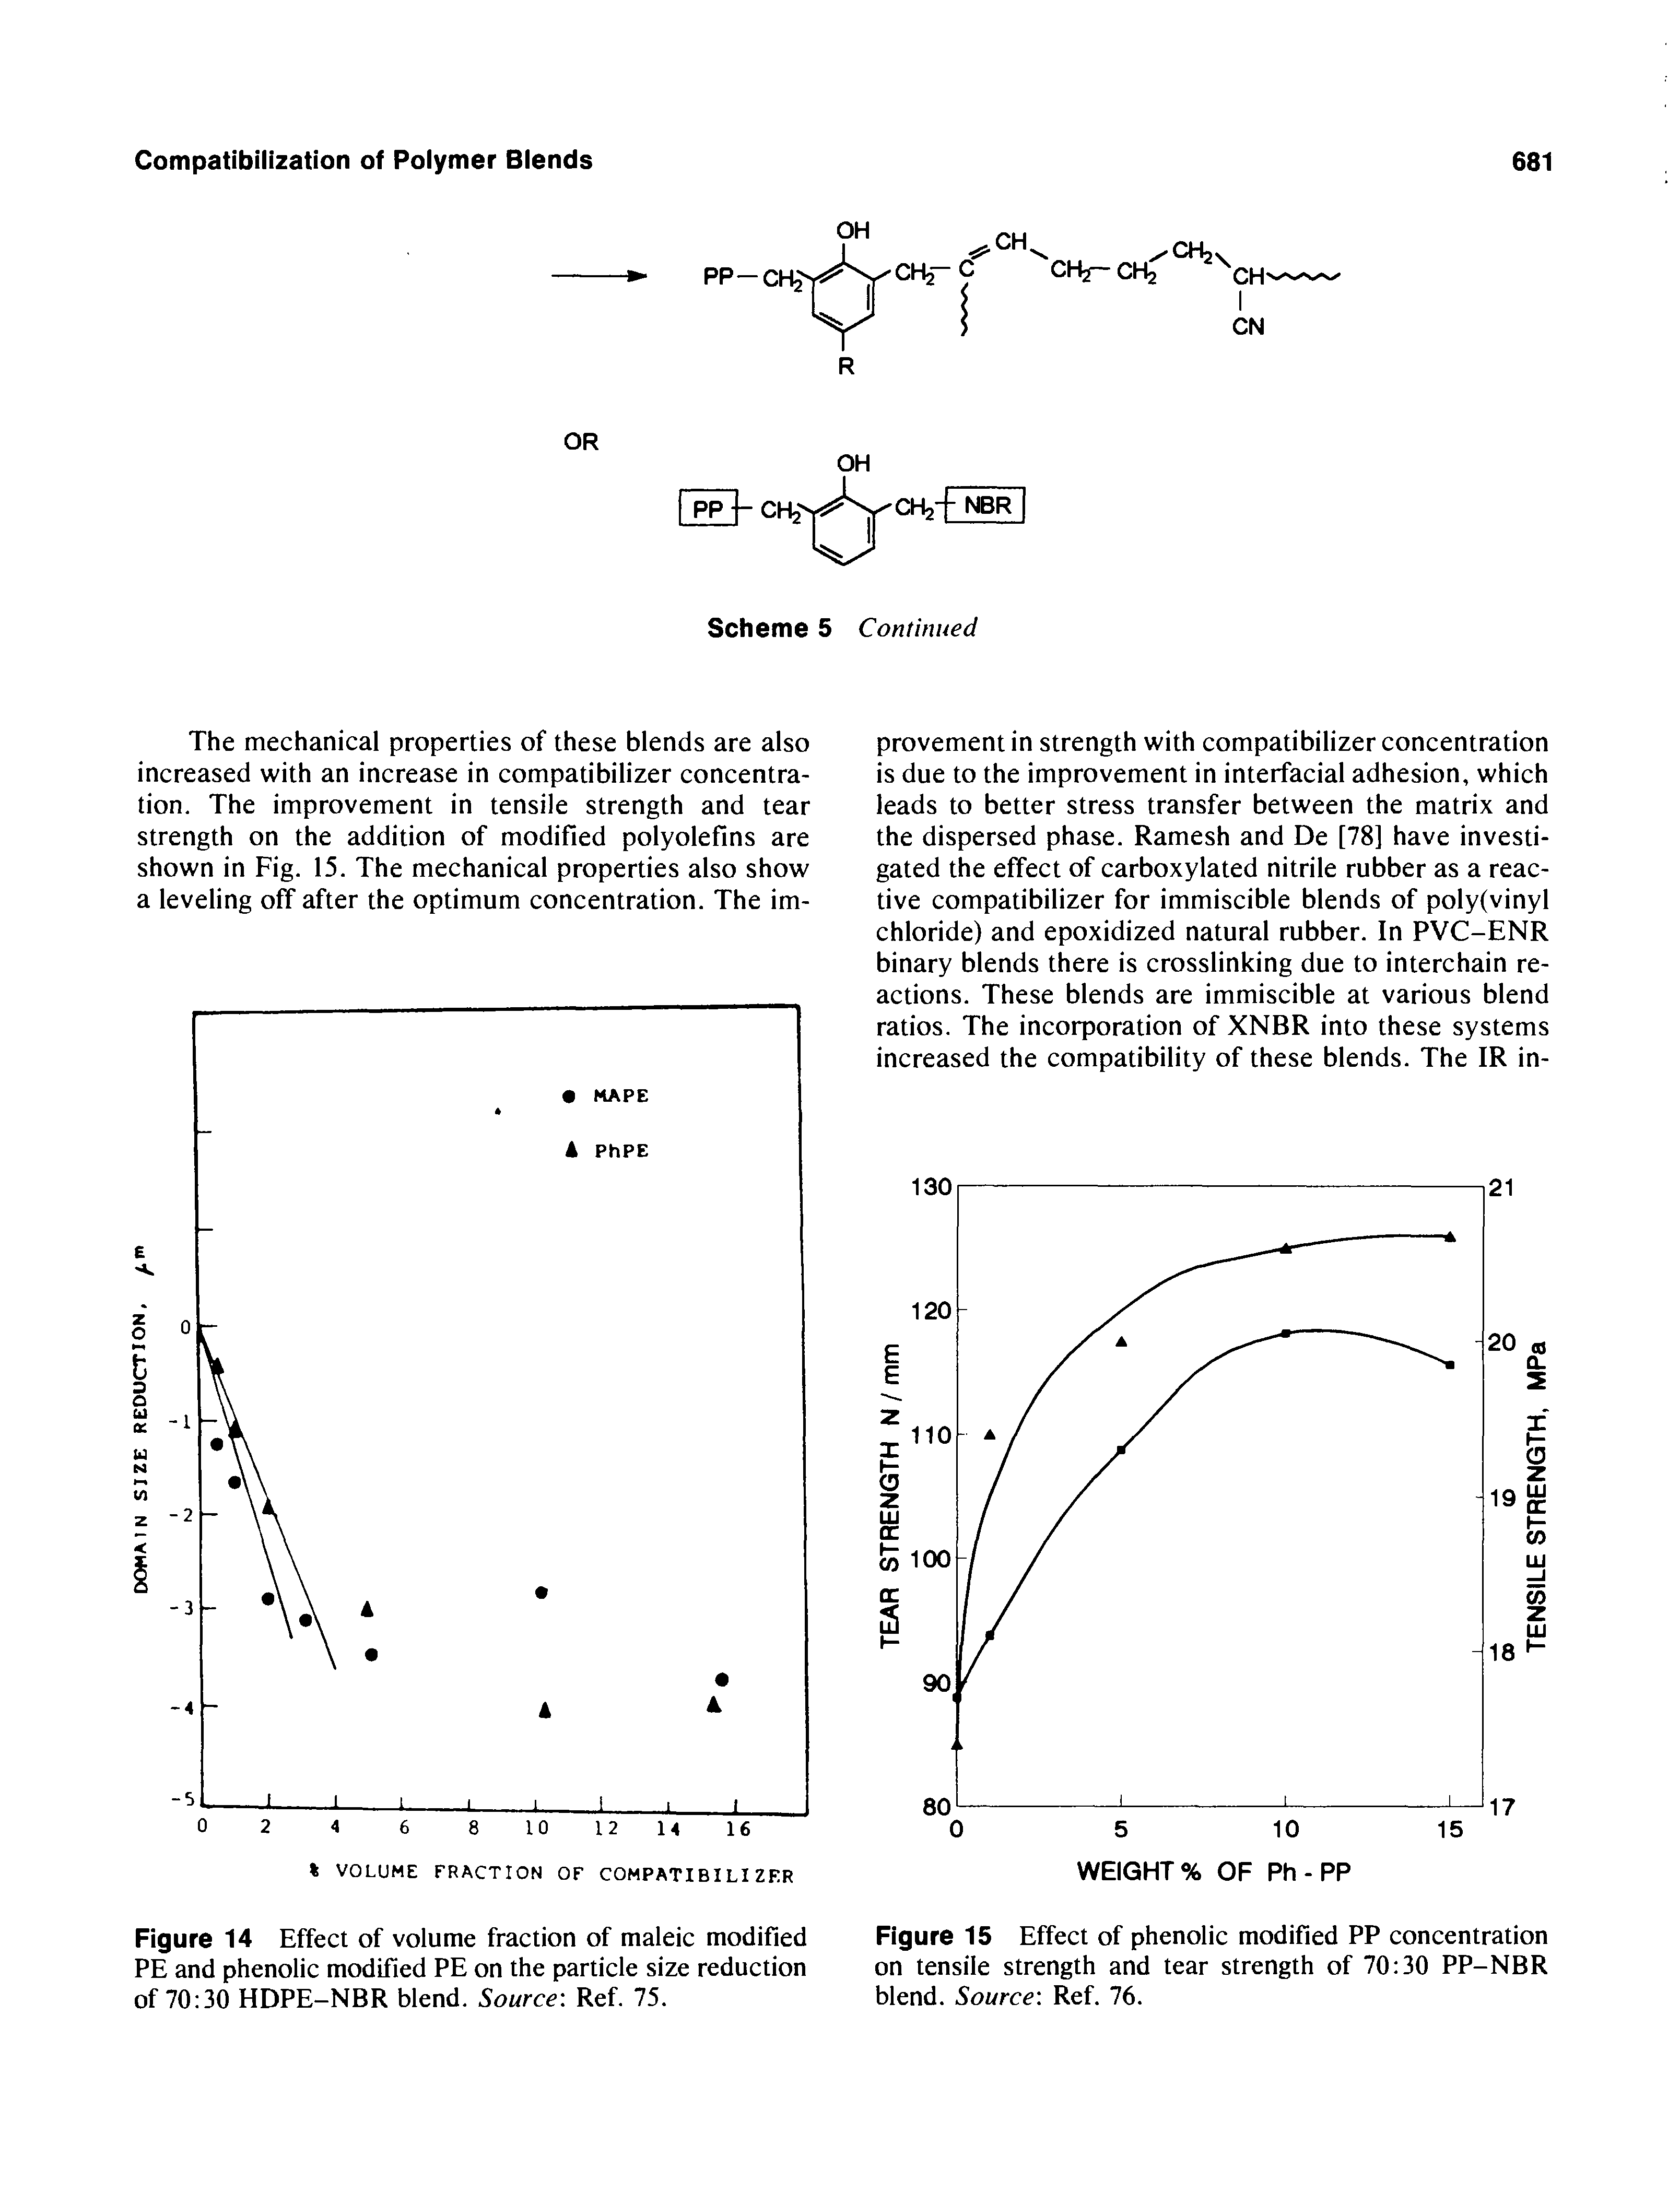 Figure 14 Effect of volume fraction of maleic modified PE and phenolic modified PE on the particle size reduction of 70 30 HDPE-NBR blend. Source Ref. 75.